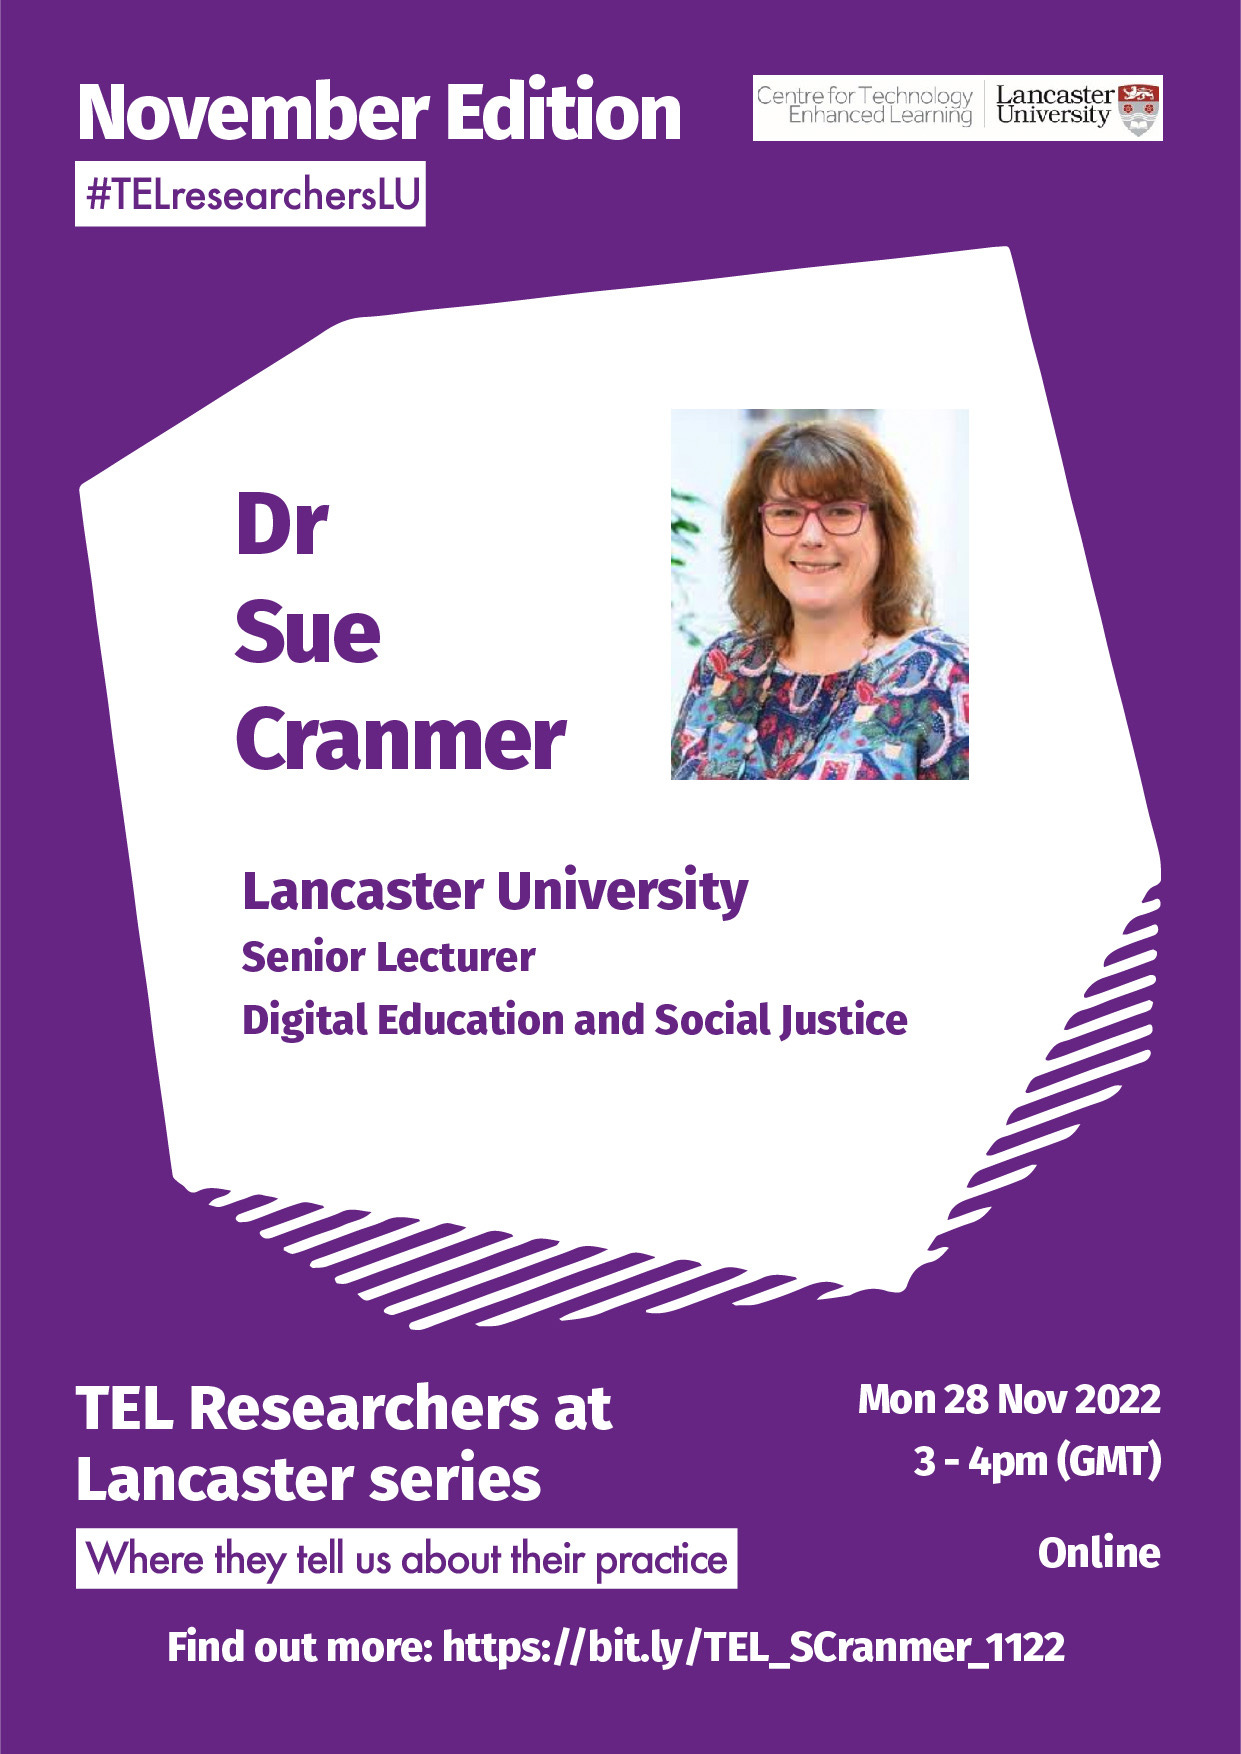 A poster with mainly white text on purple background and 2 images. Top left corner, text reads, November Edition #TELresearchersLU. Top right corner is the CTEL at Lancaster University logo. In the middle centre of the poster, text reads: Dr Sue Cranmer, Lancaster University, Senior University, Digital Educational and Social Justice, with a photo of Sue Cranmer. Bottom left corner, text reads: TEL Researchers at Lancaster series, where they tell us about their practice. Bottom right, text reads: Mon 28 Nov 2022, 3-4pm (GMT), Online. At the bottom centre is the booking link, it reads, Find out more: https://bit.ly/TEL_SCranmer_1122